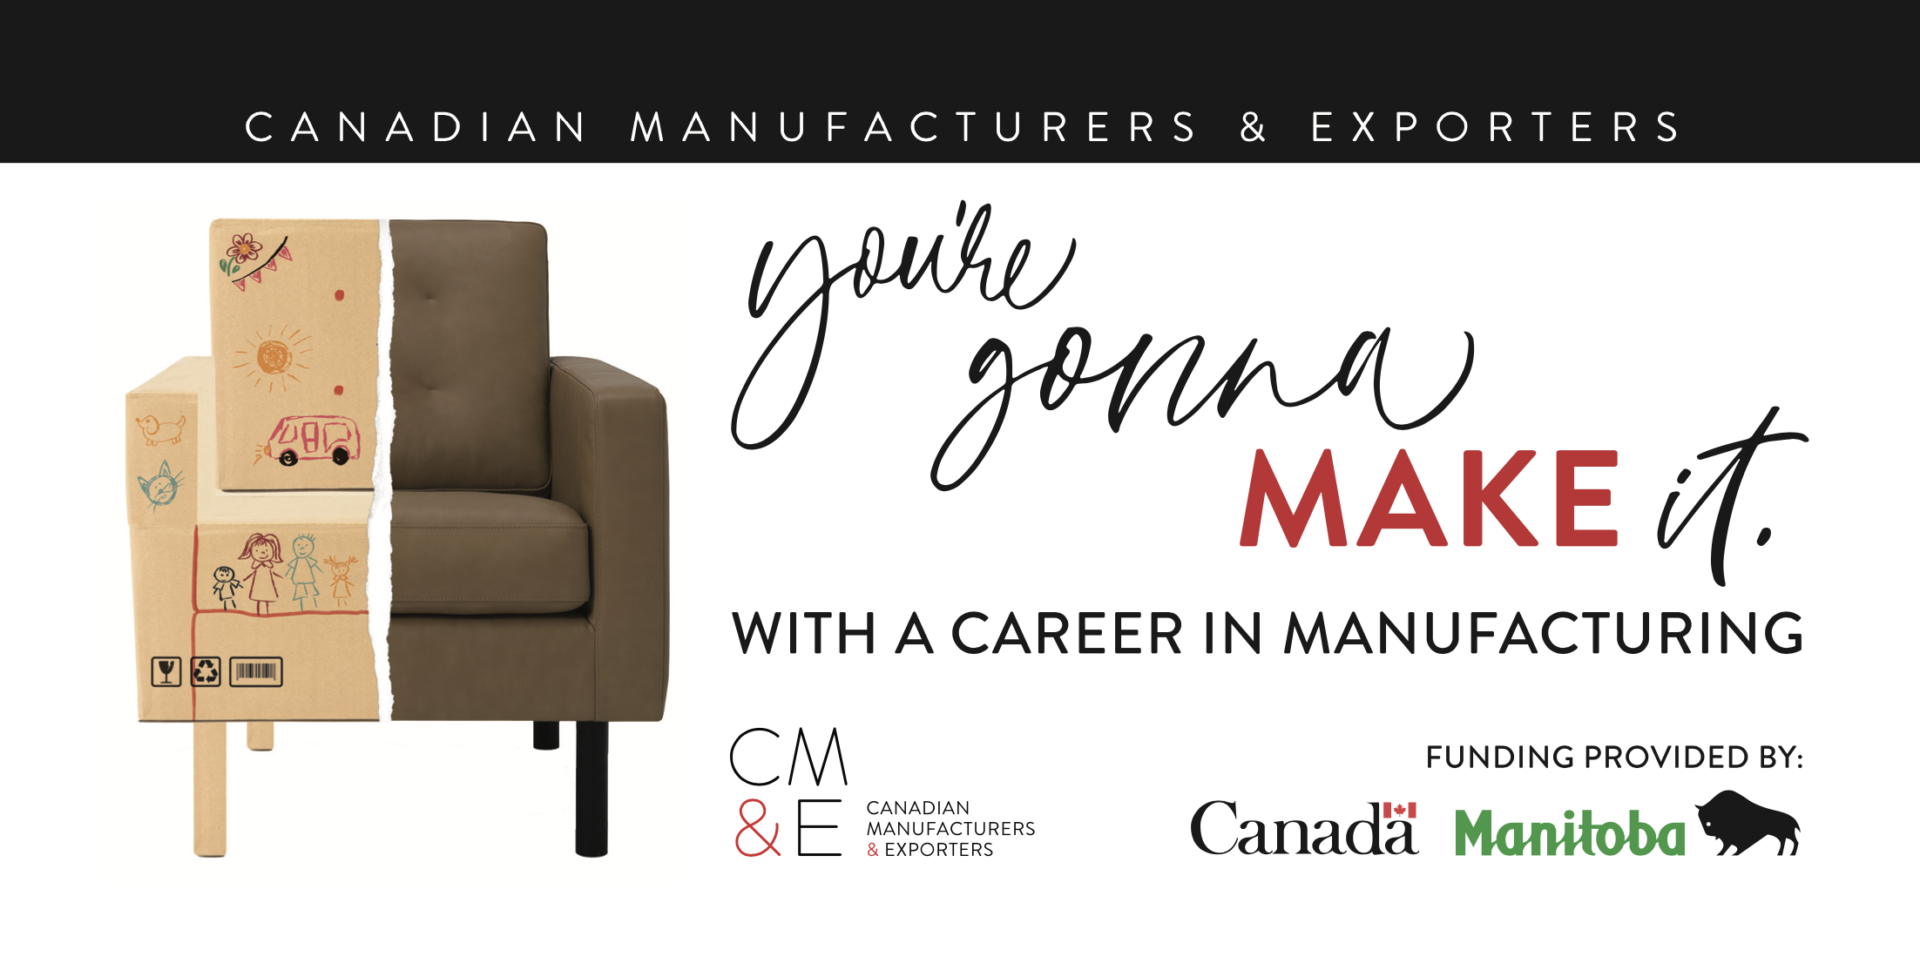 You're gonna make it. With a career in manufacturing. Funding provided by Manitoba and Canada.